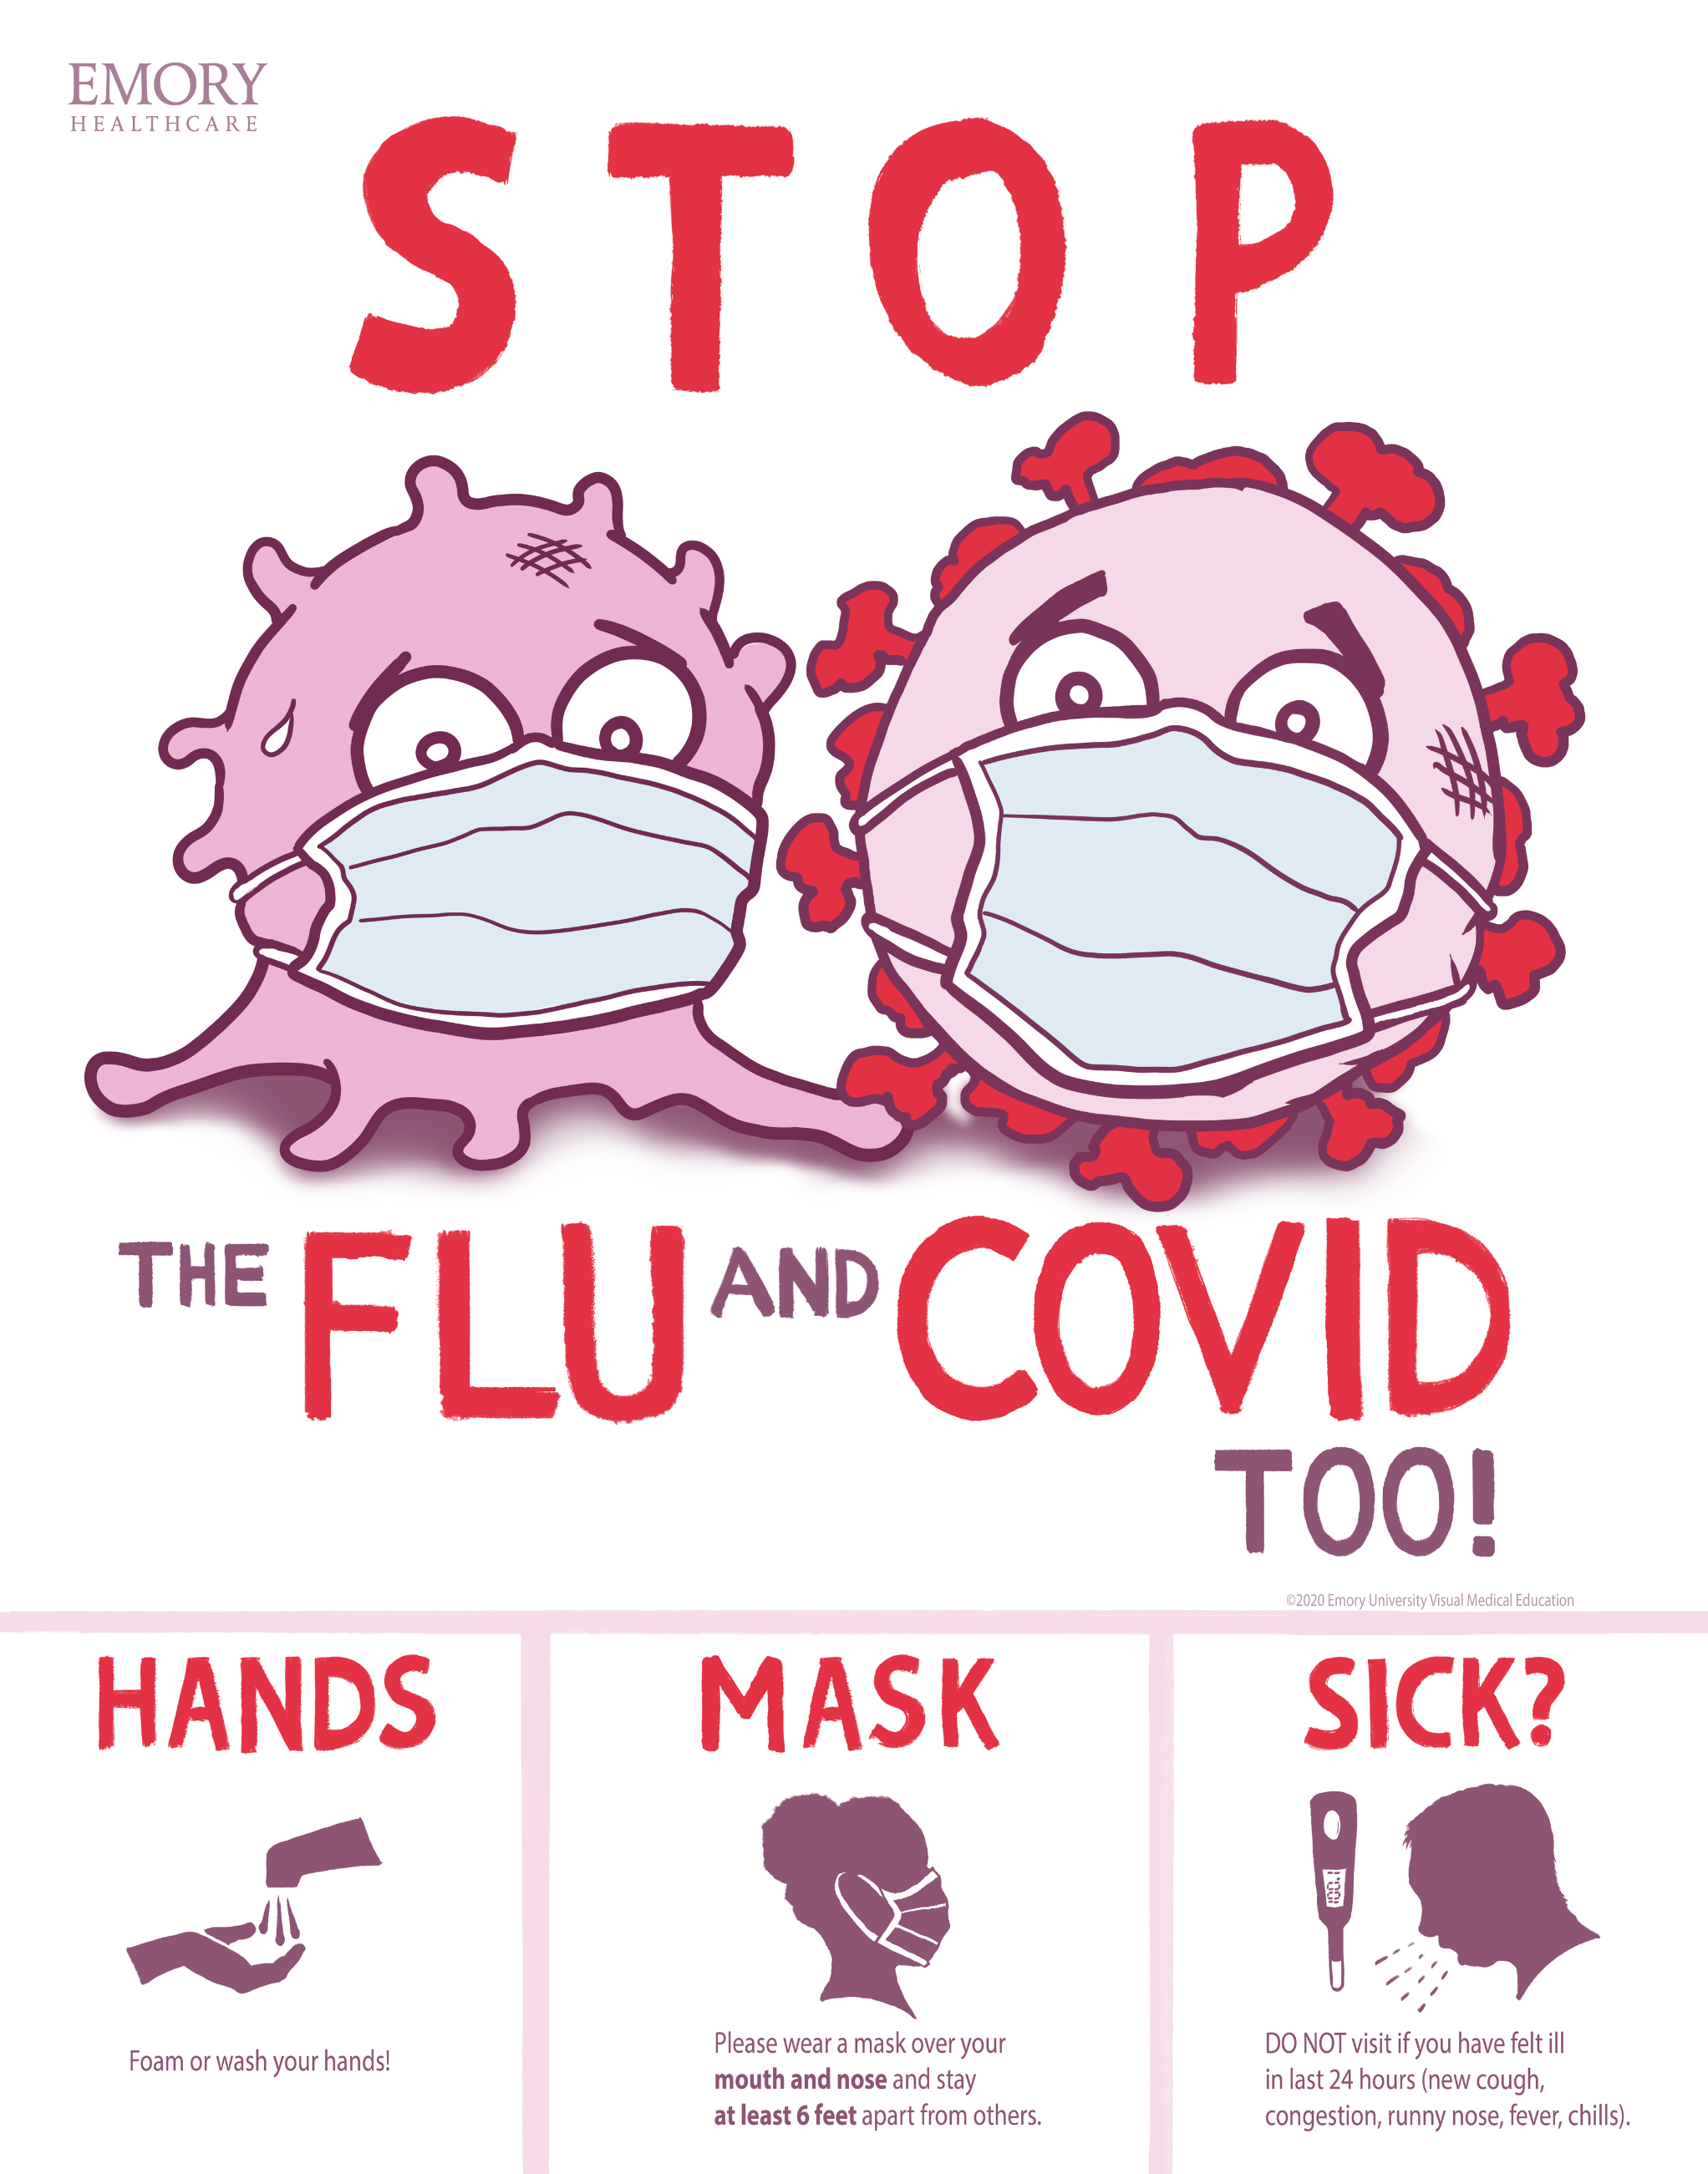 Stop The Flu and COVID Too! This poster was printed and displayed at Emory hospital locations to help control the spread of COVID and influenza.